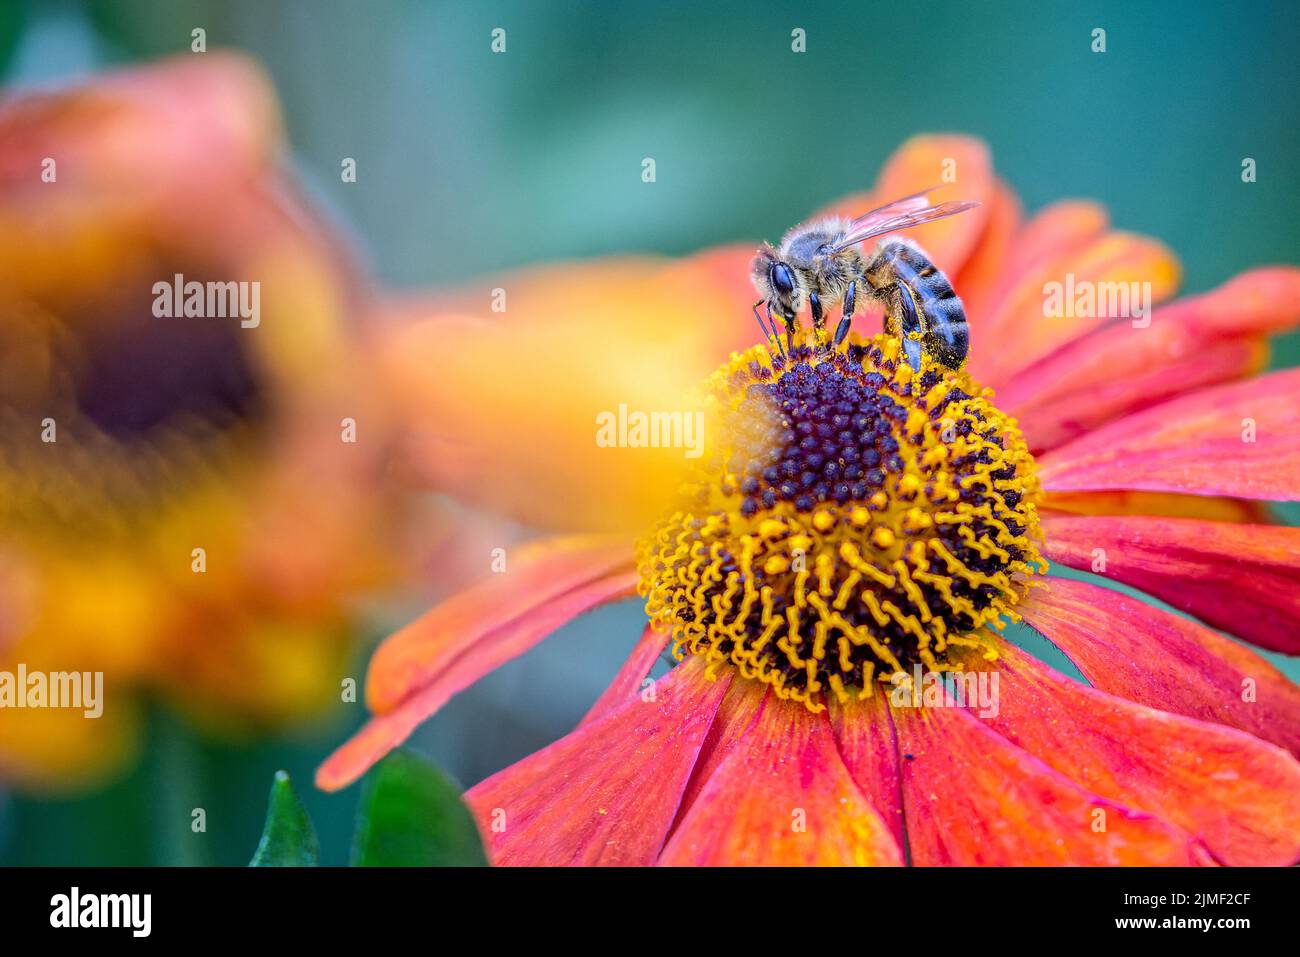 Close up of a striped bee collecting pollen from a colourful echinacea flower head Stock Photo